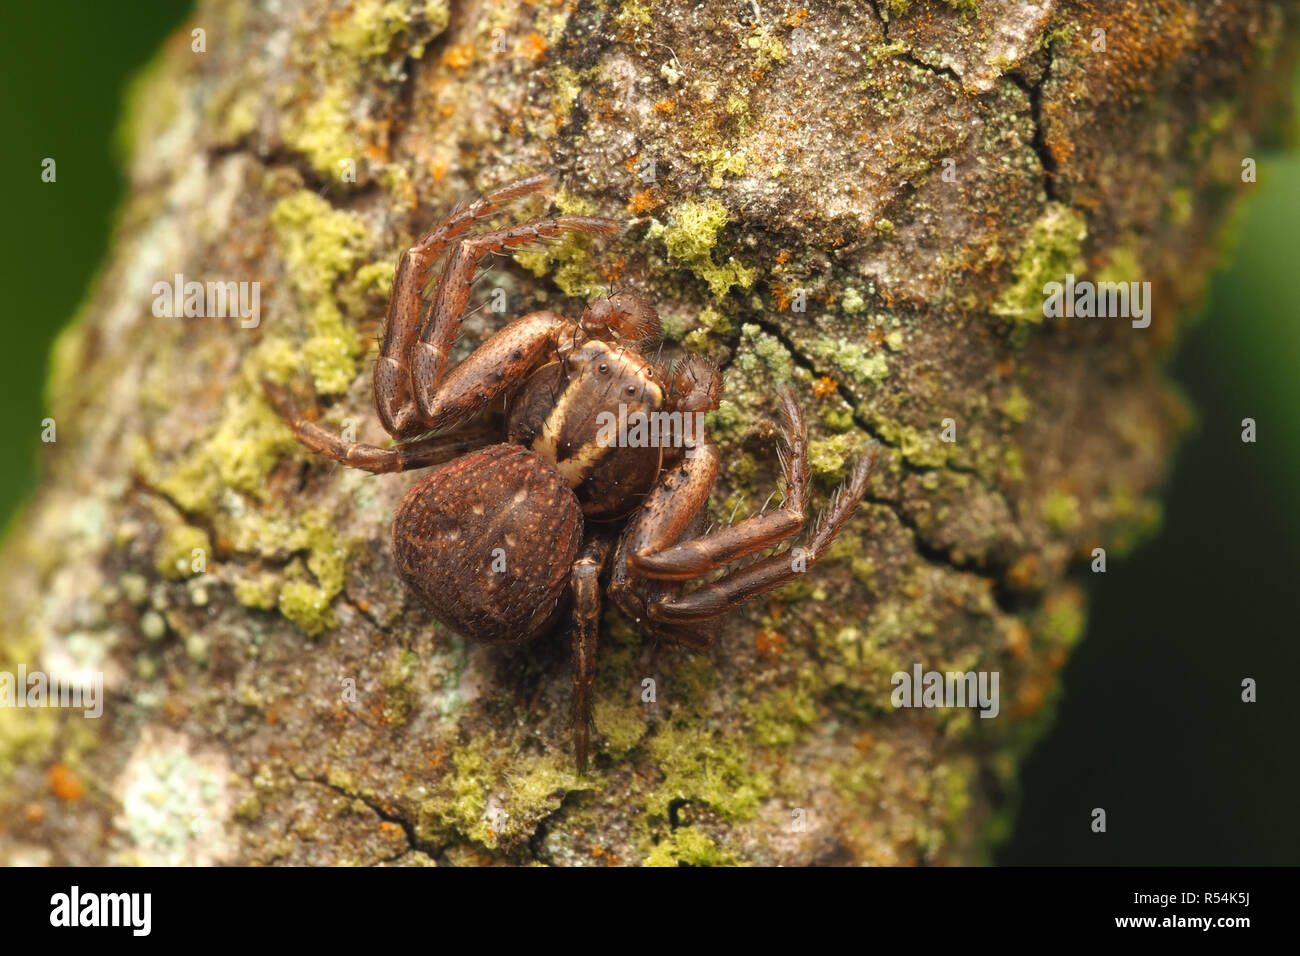 Male Xysticus sp Crab Spider resting on branch of tree. Tipperary, Ireland Stock Photo